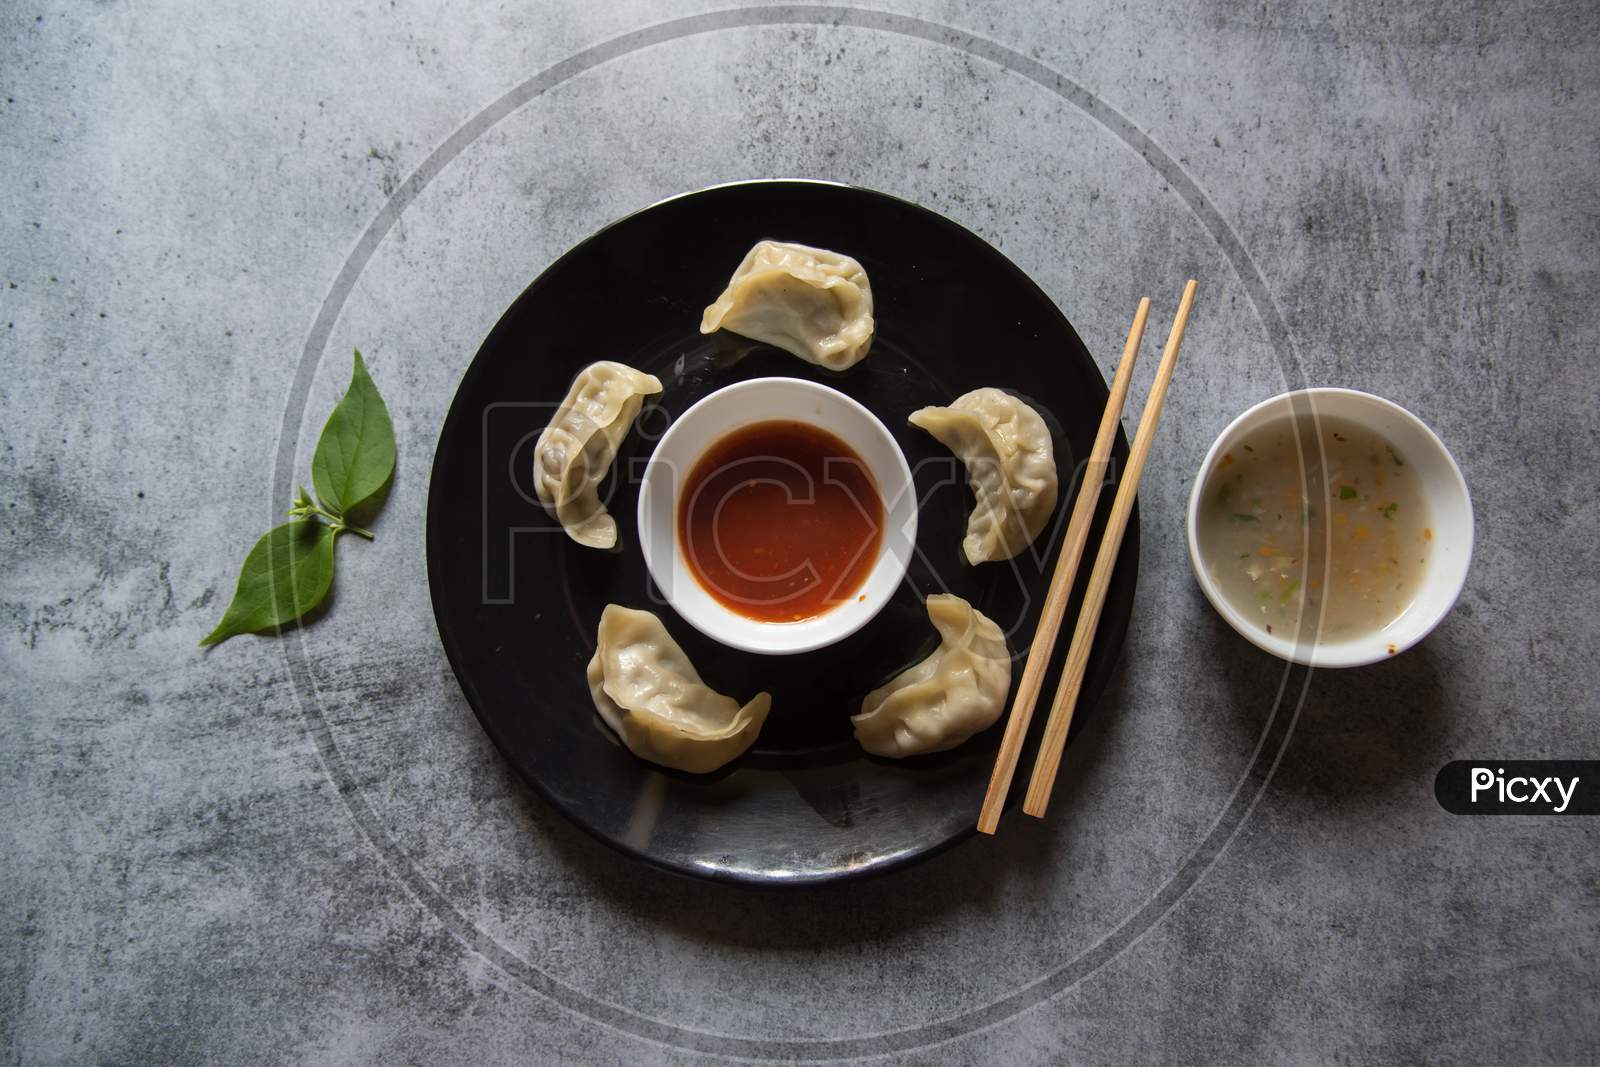 Popular snacks of south east Asia momos on a black plate